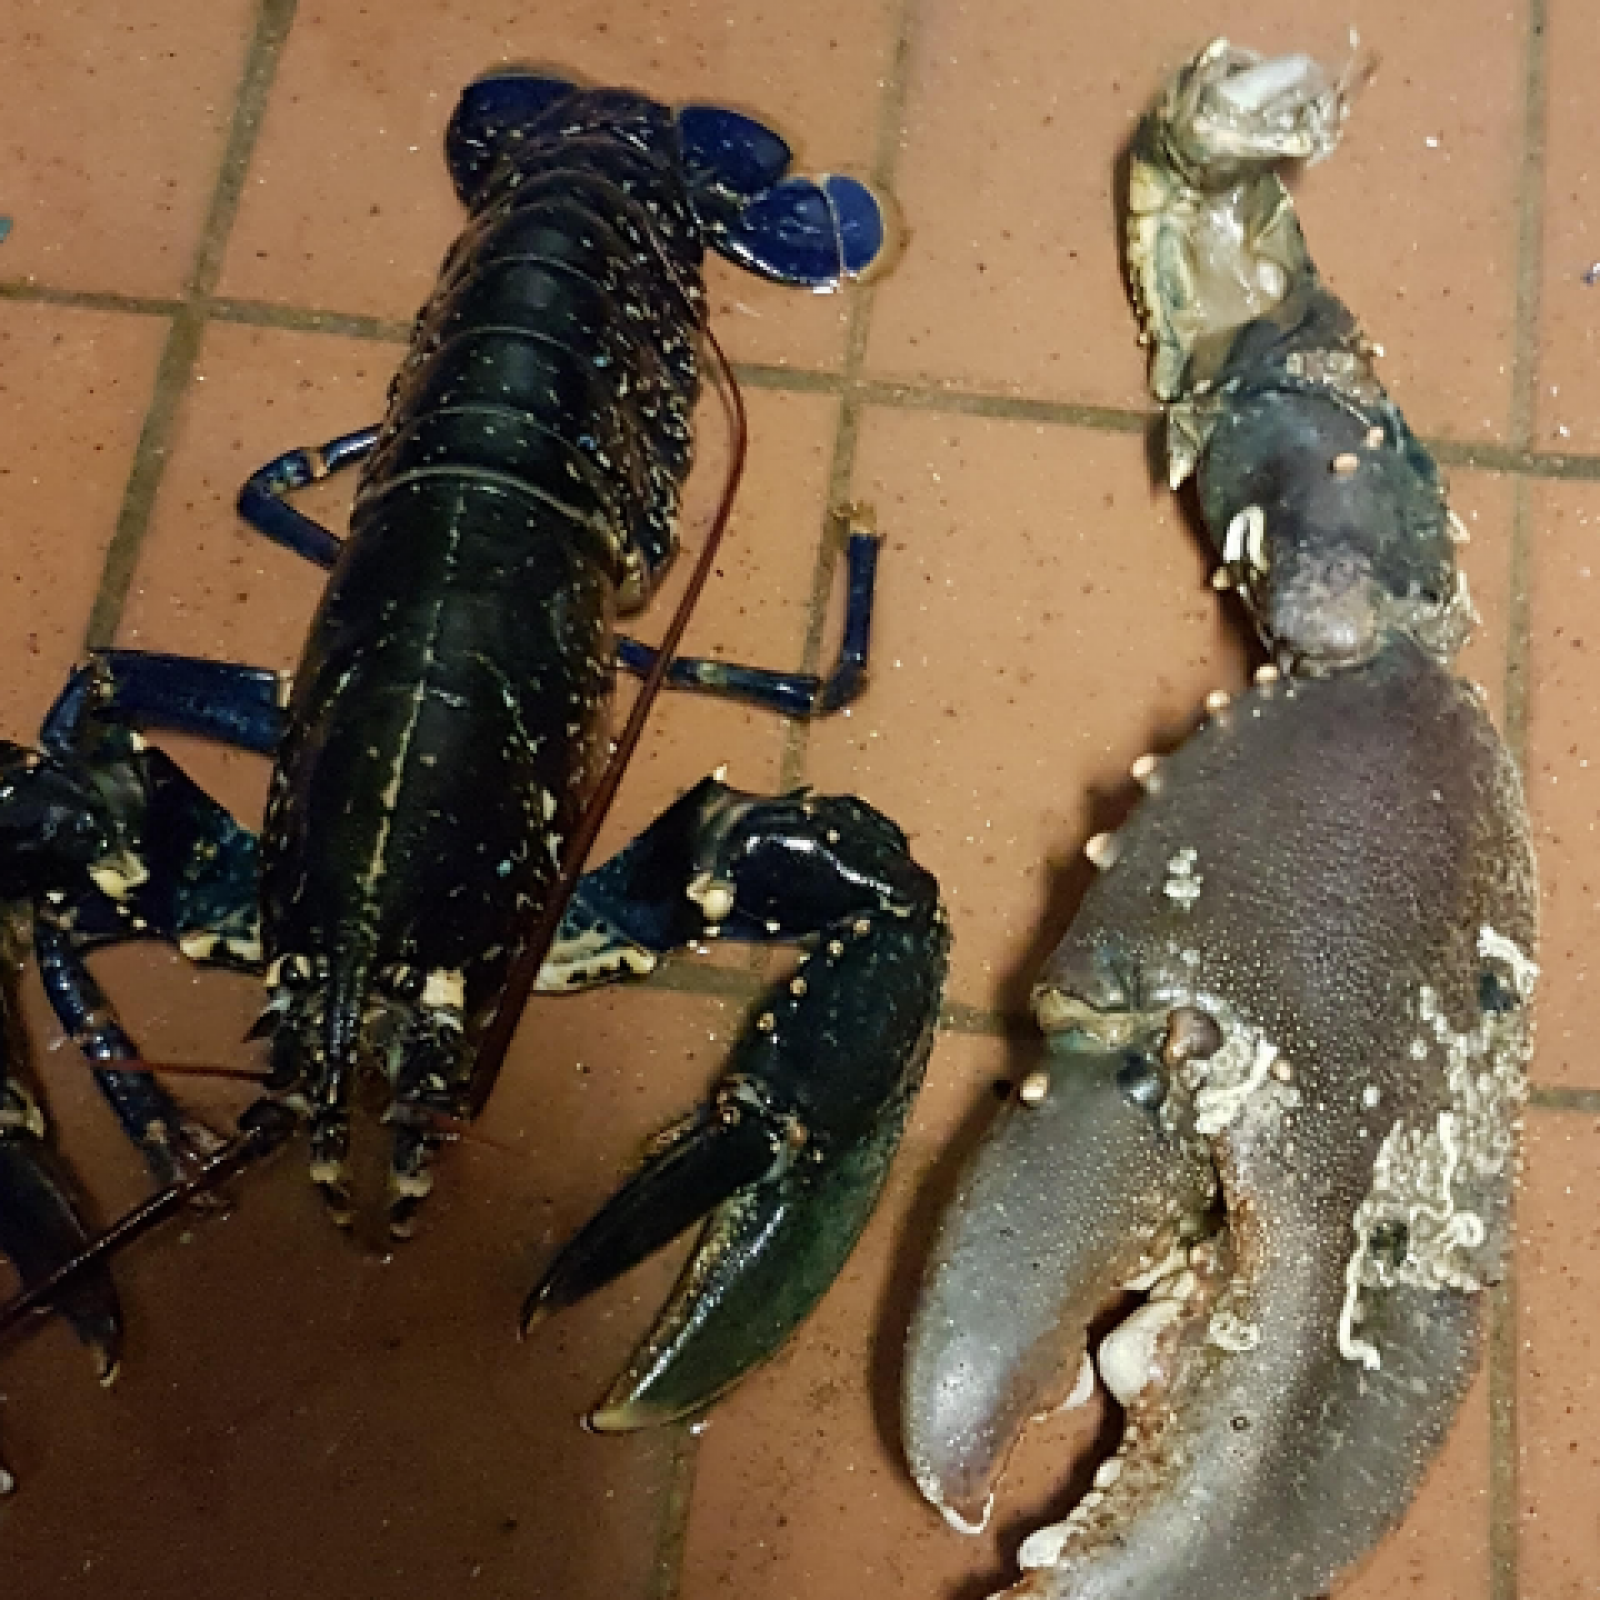 Massive Lobster Claw Found off Coast of Wales Hints at Giant Crustacean  Living in Water